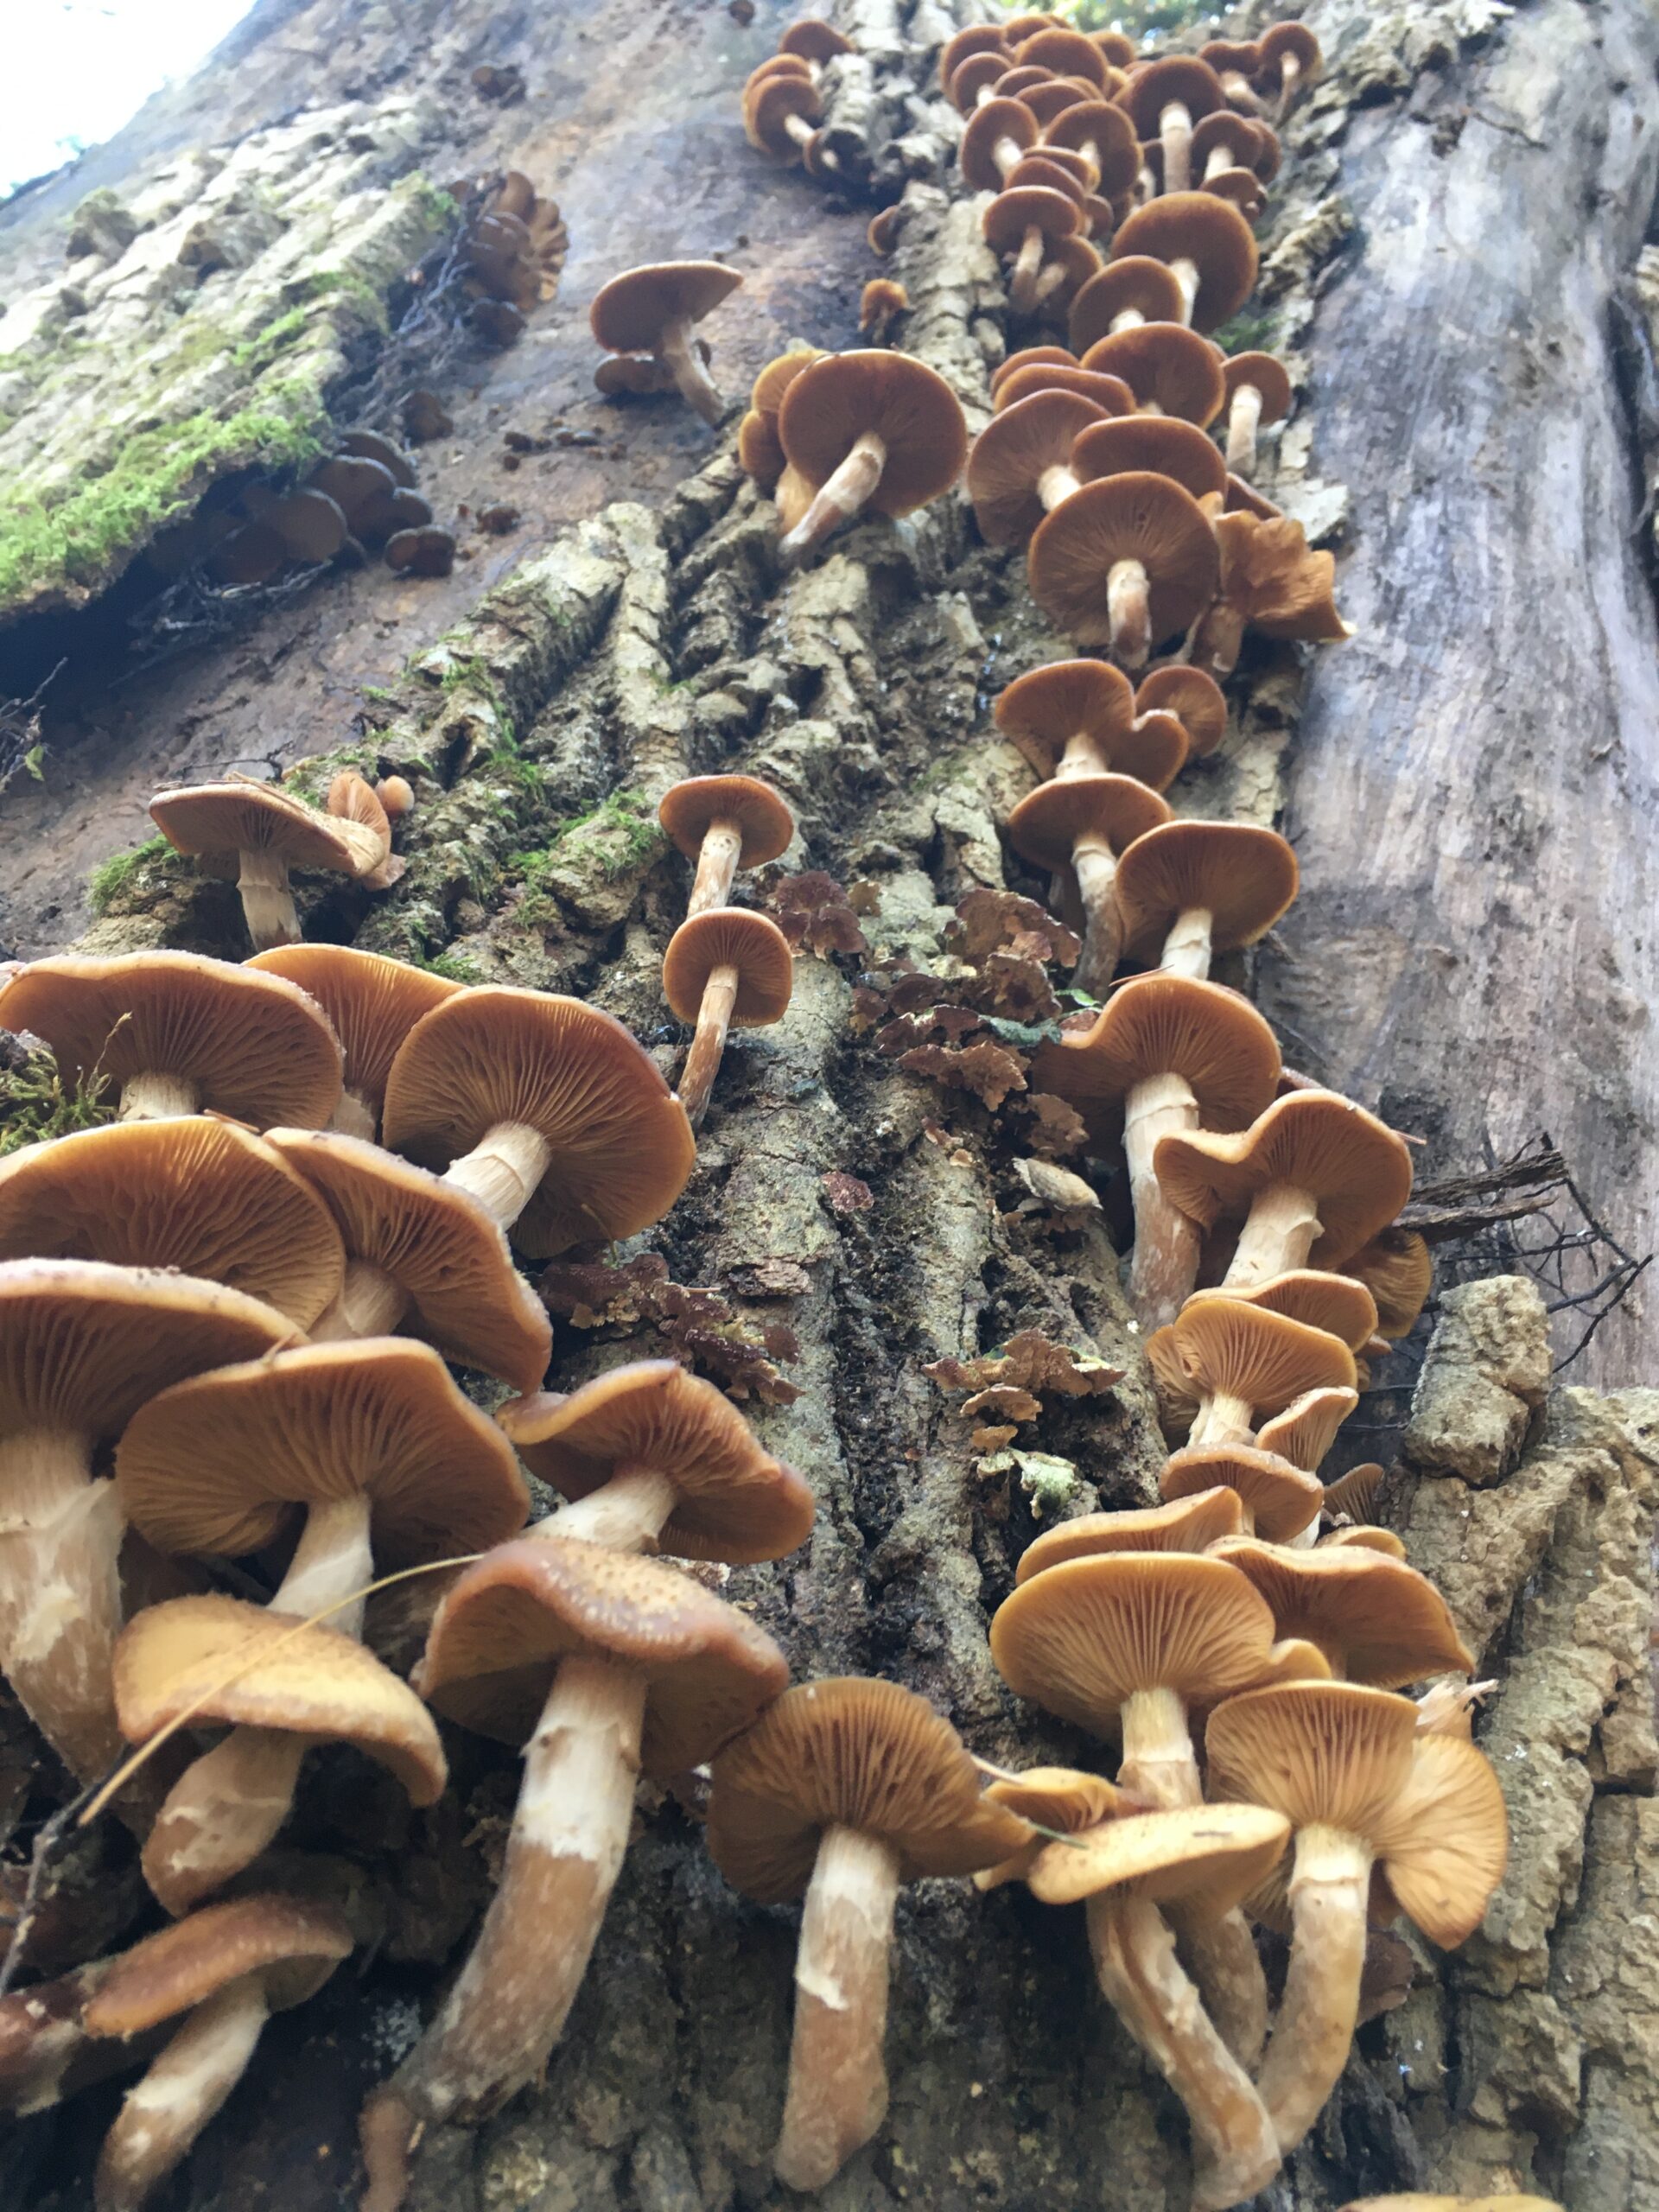 bulbous honey mushrooms growing from a rotting tree